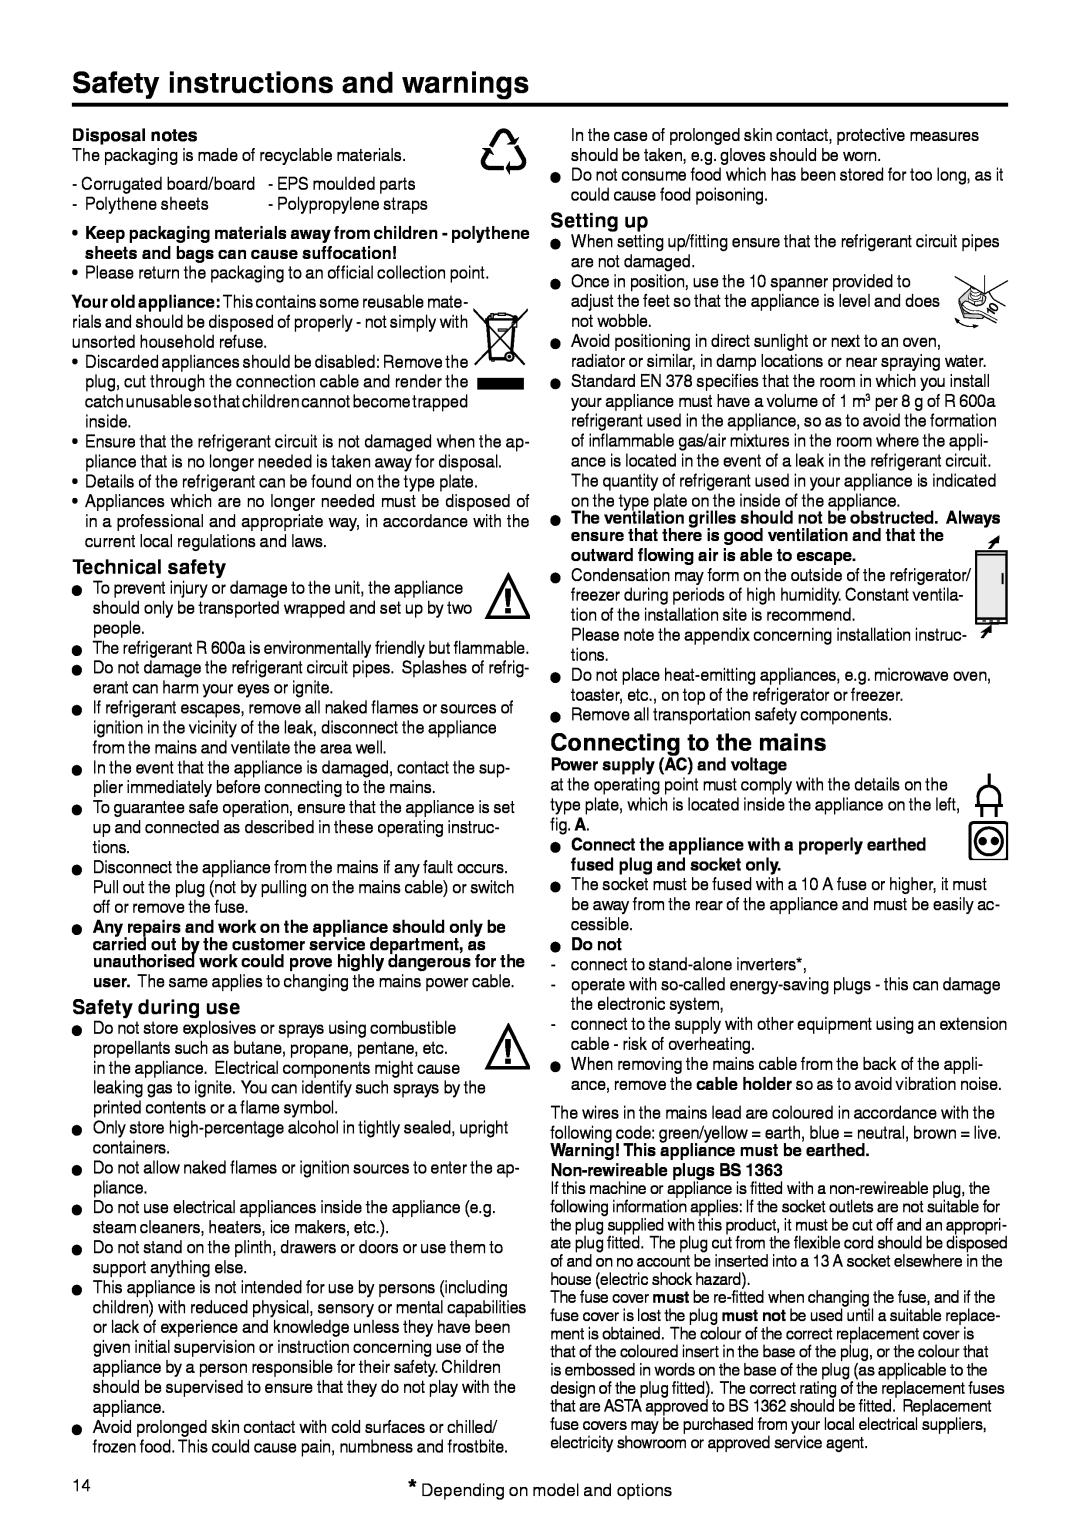 Liebherr 7082 212-02 manual Safety instructions and warnings, Connecting to the mains, Technical safety, Safety during use 